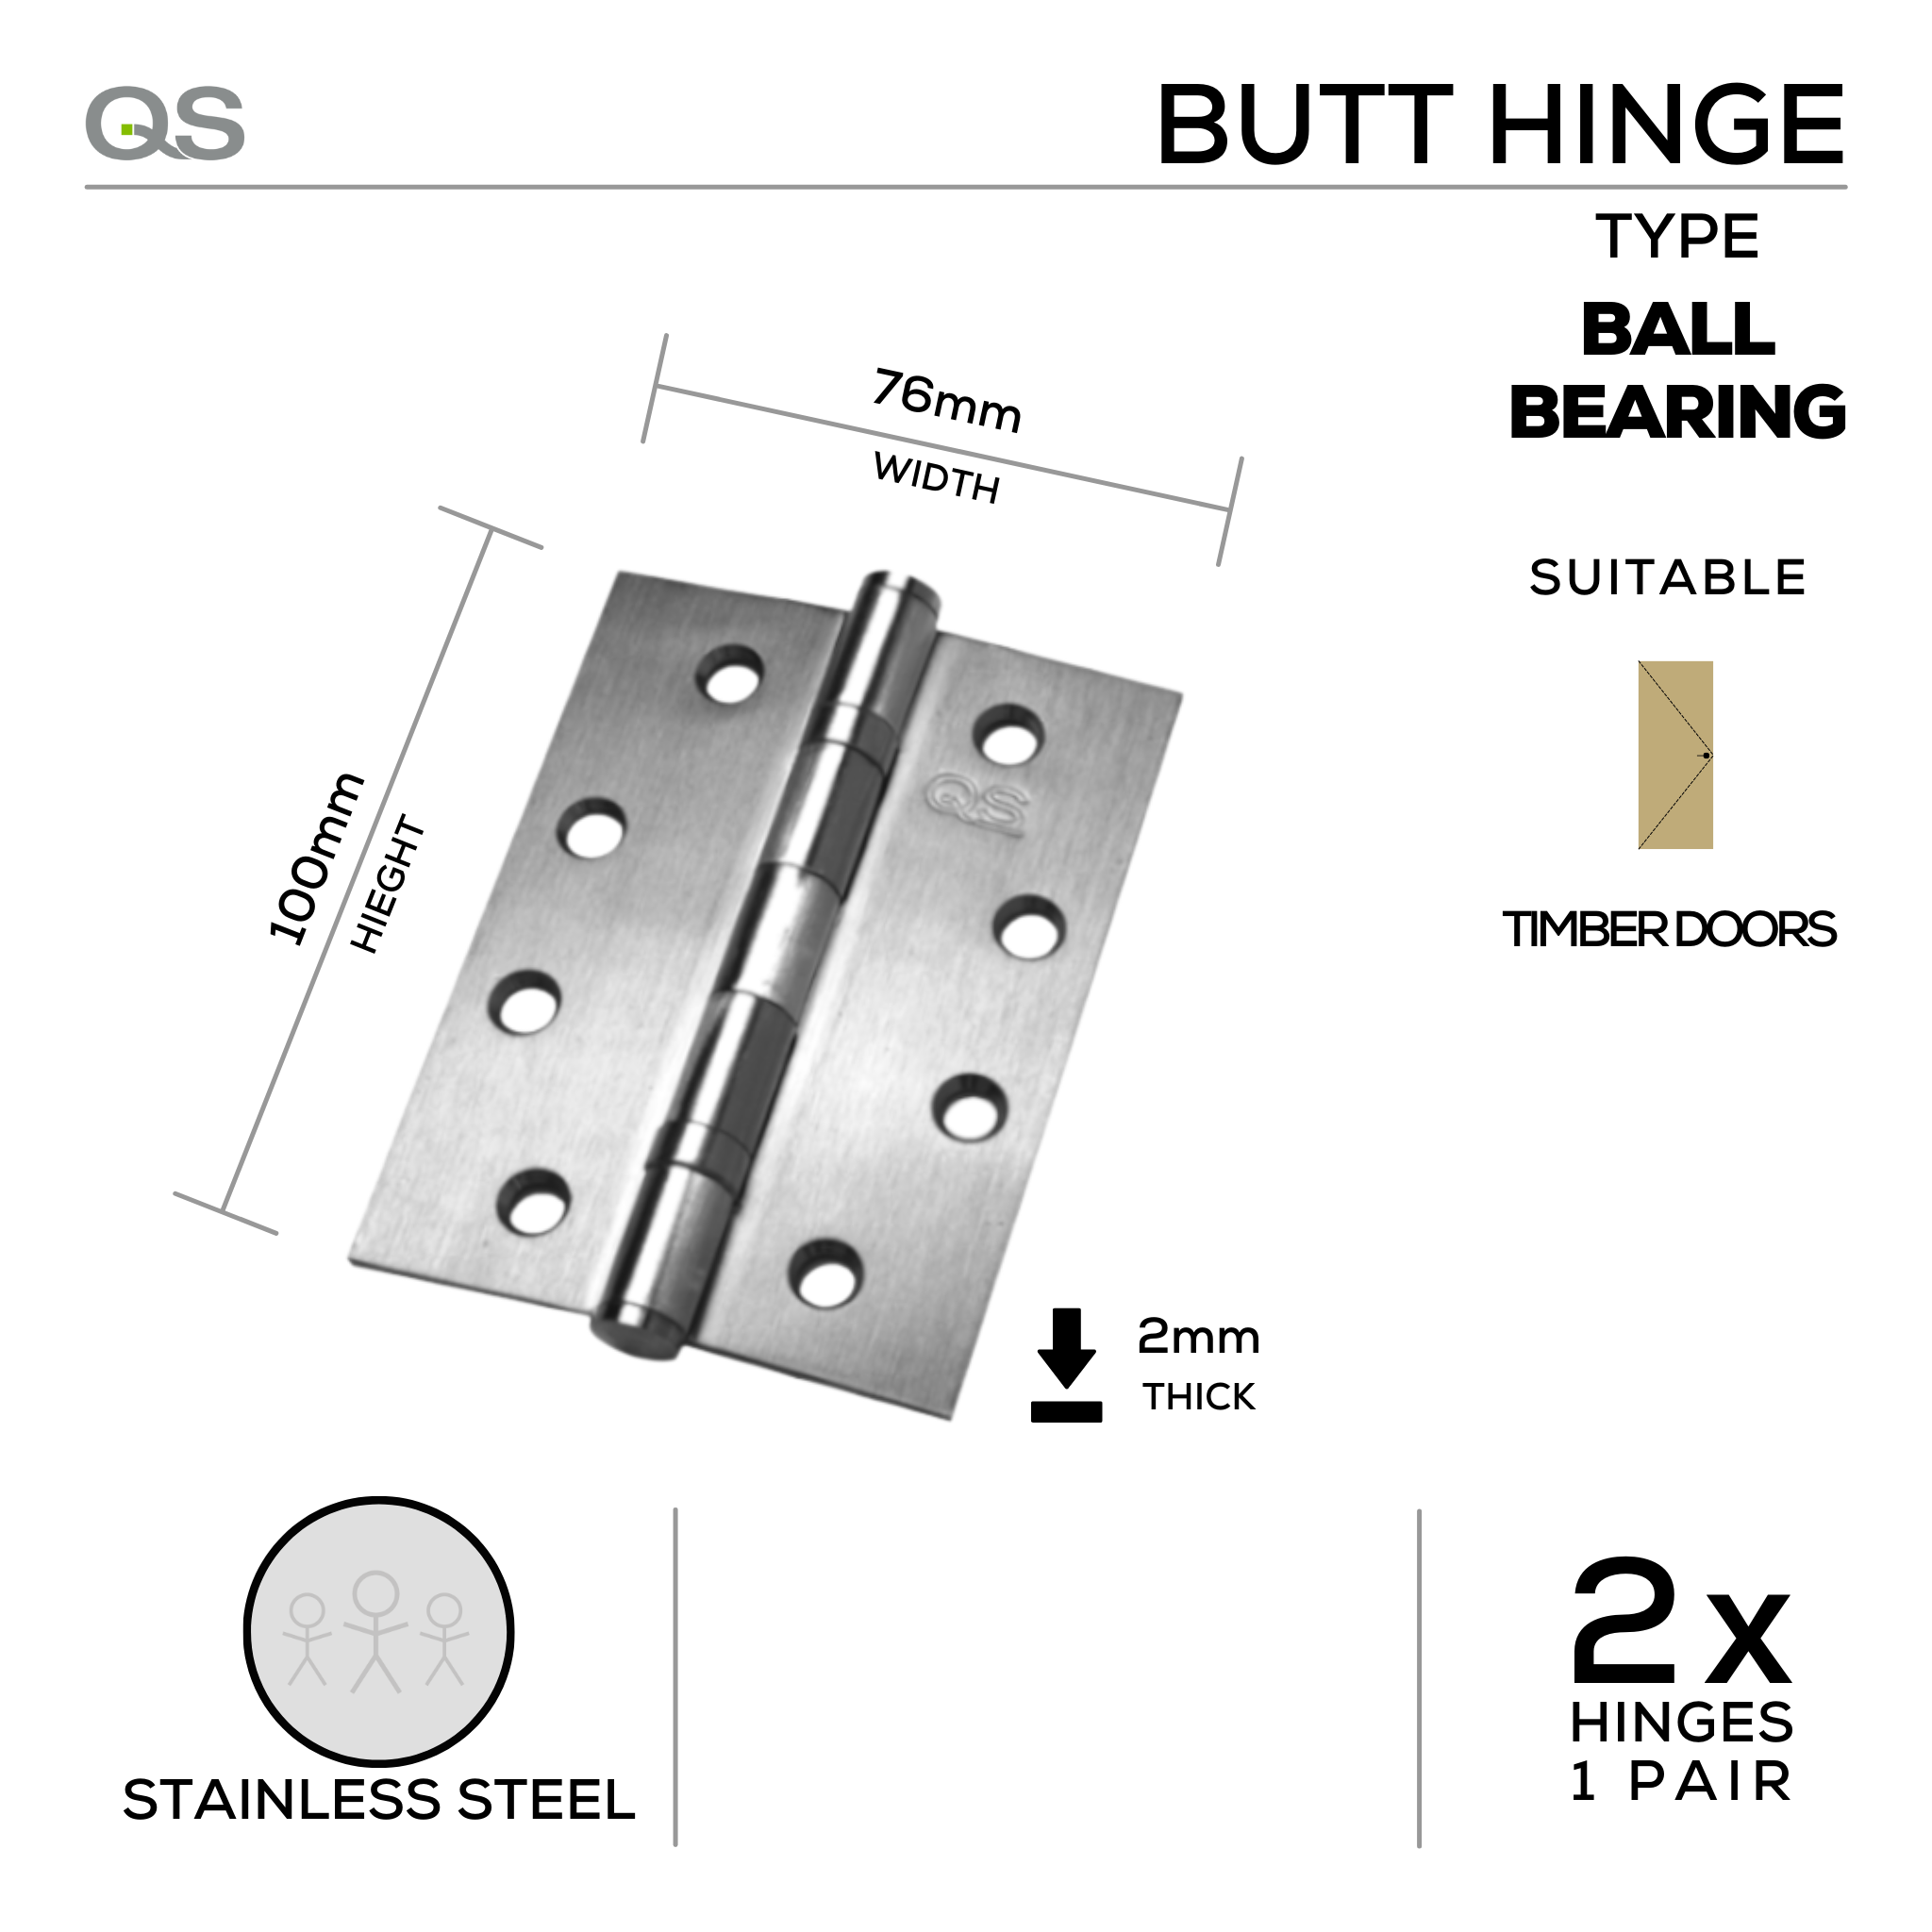 QS4417b, Butt Hinge, 2 x Hinges (1 Pair), 100mm (h) x 76mm (w) x 2mm (t), Stainless Steel, QS